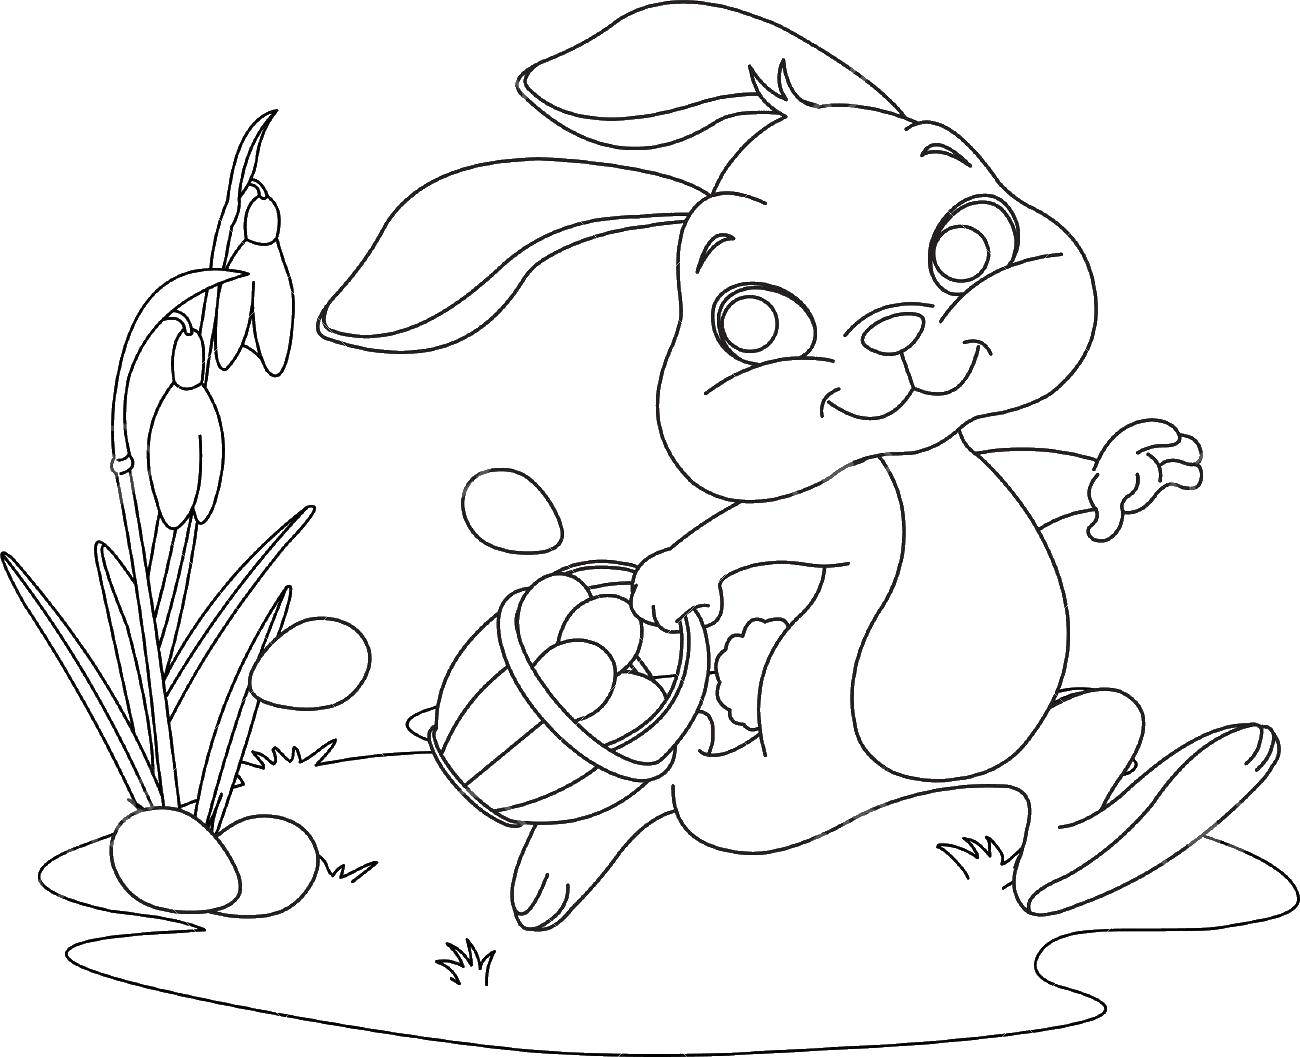 Coloring Rabbit running with basket of eggs at the spring garden with snowdrops. Category the rabbit. Tags:  snowdrop, basket, eggs, rabbit.